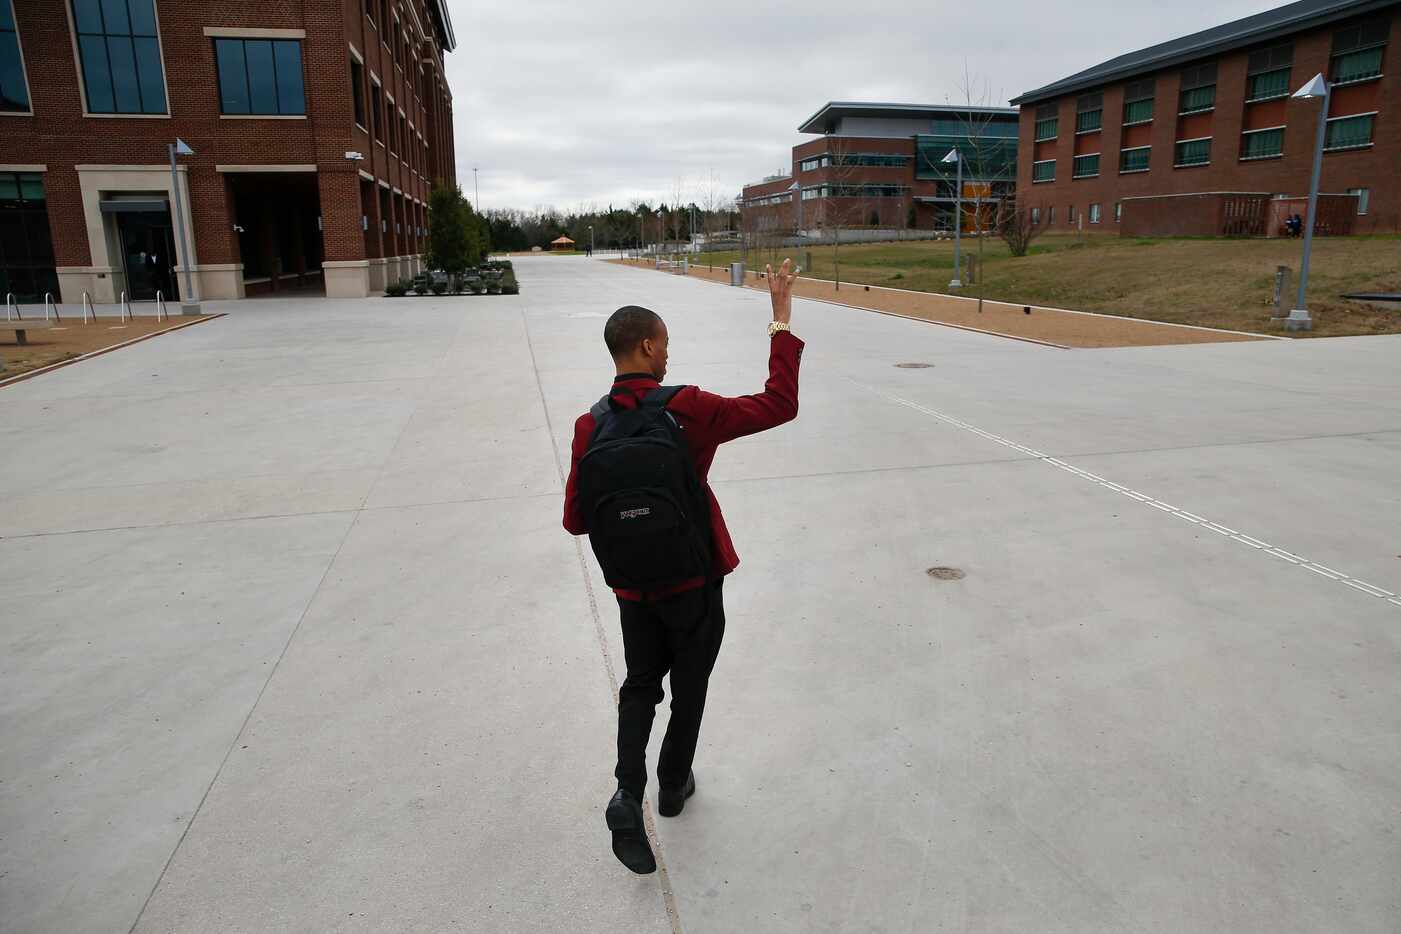 Jaylon Miller waves to a friend across the campus common area at the University of North...